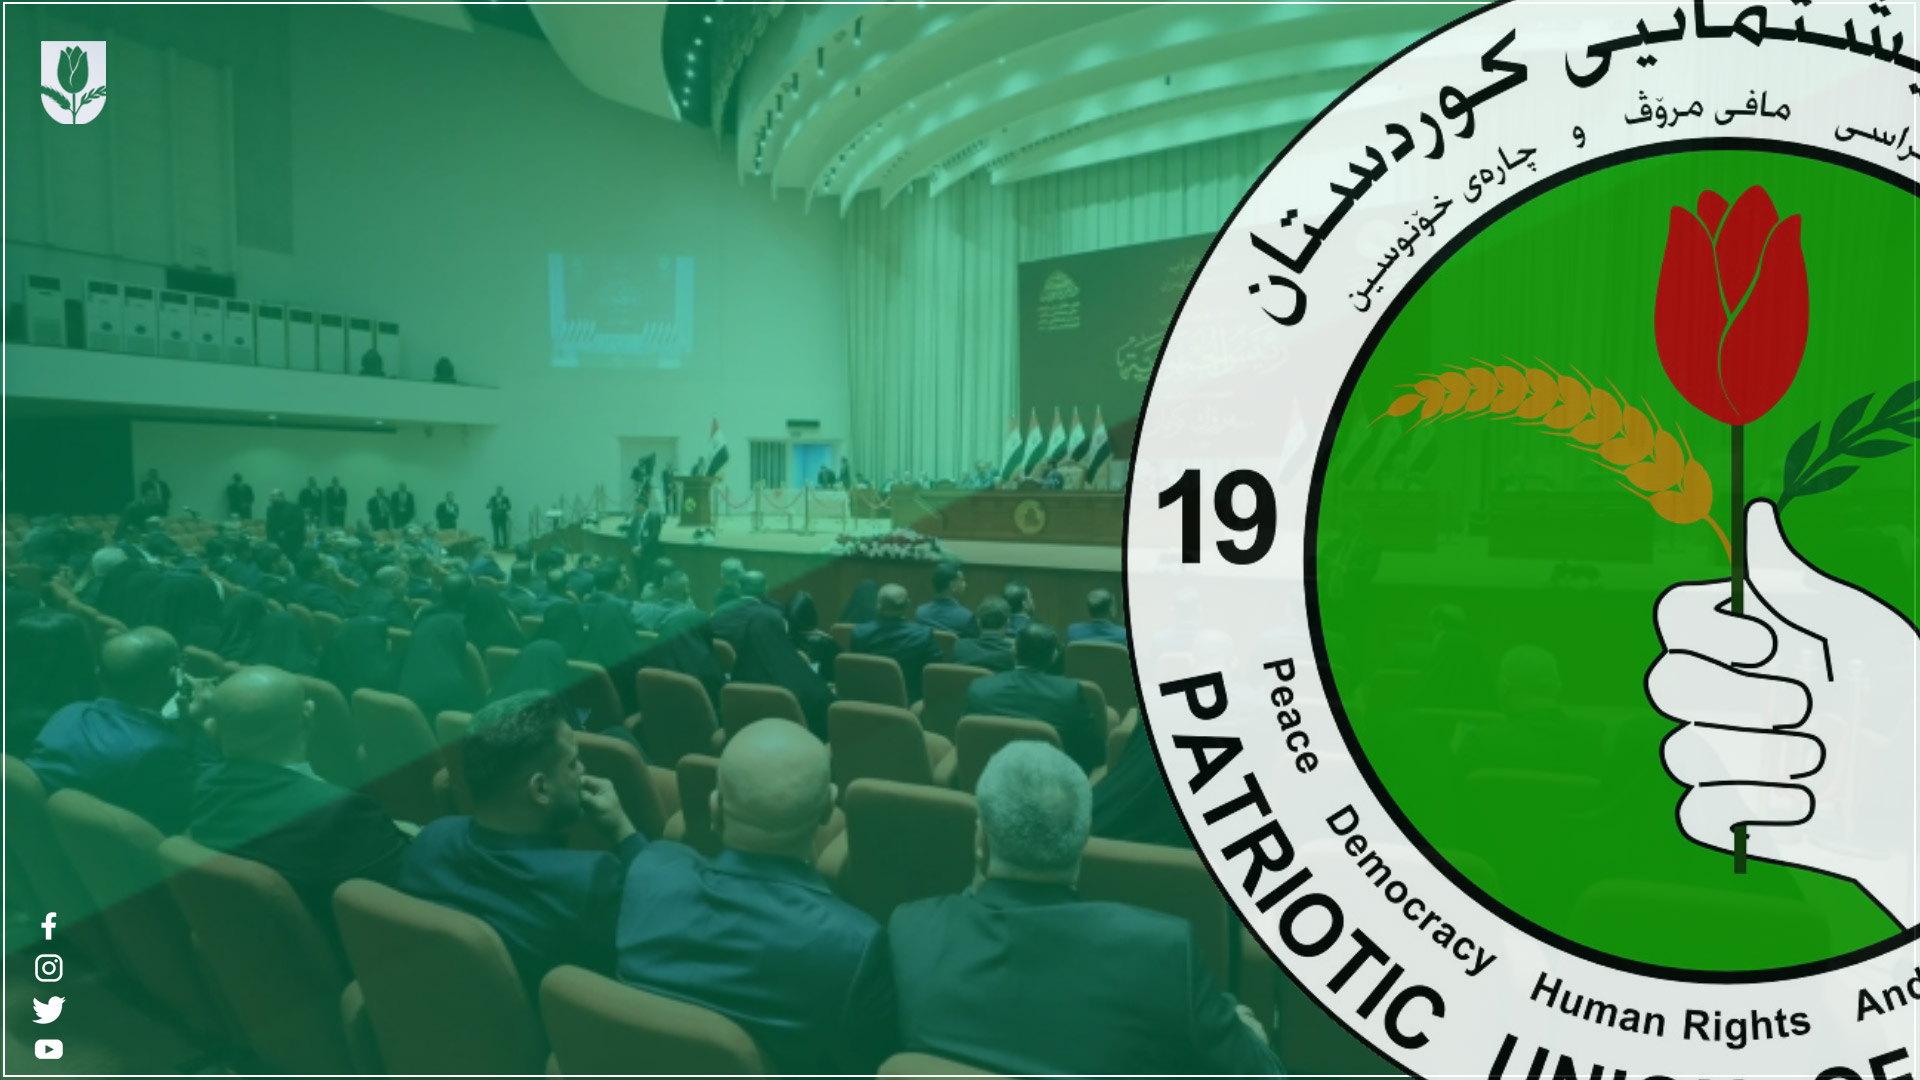  PUK logo and Iraqi Parliament in the background.